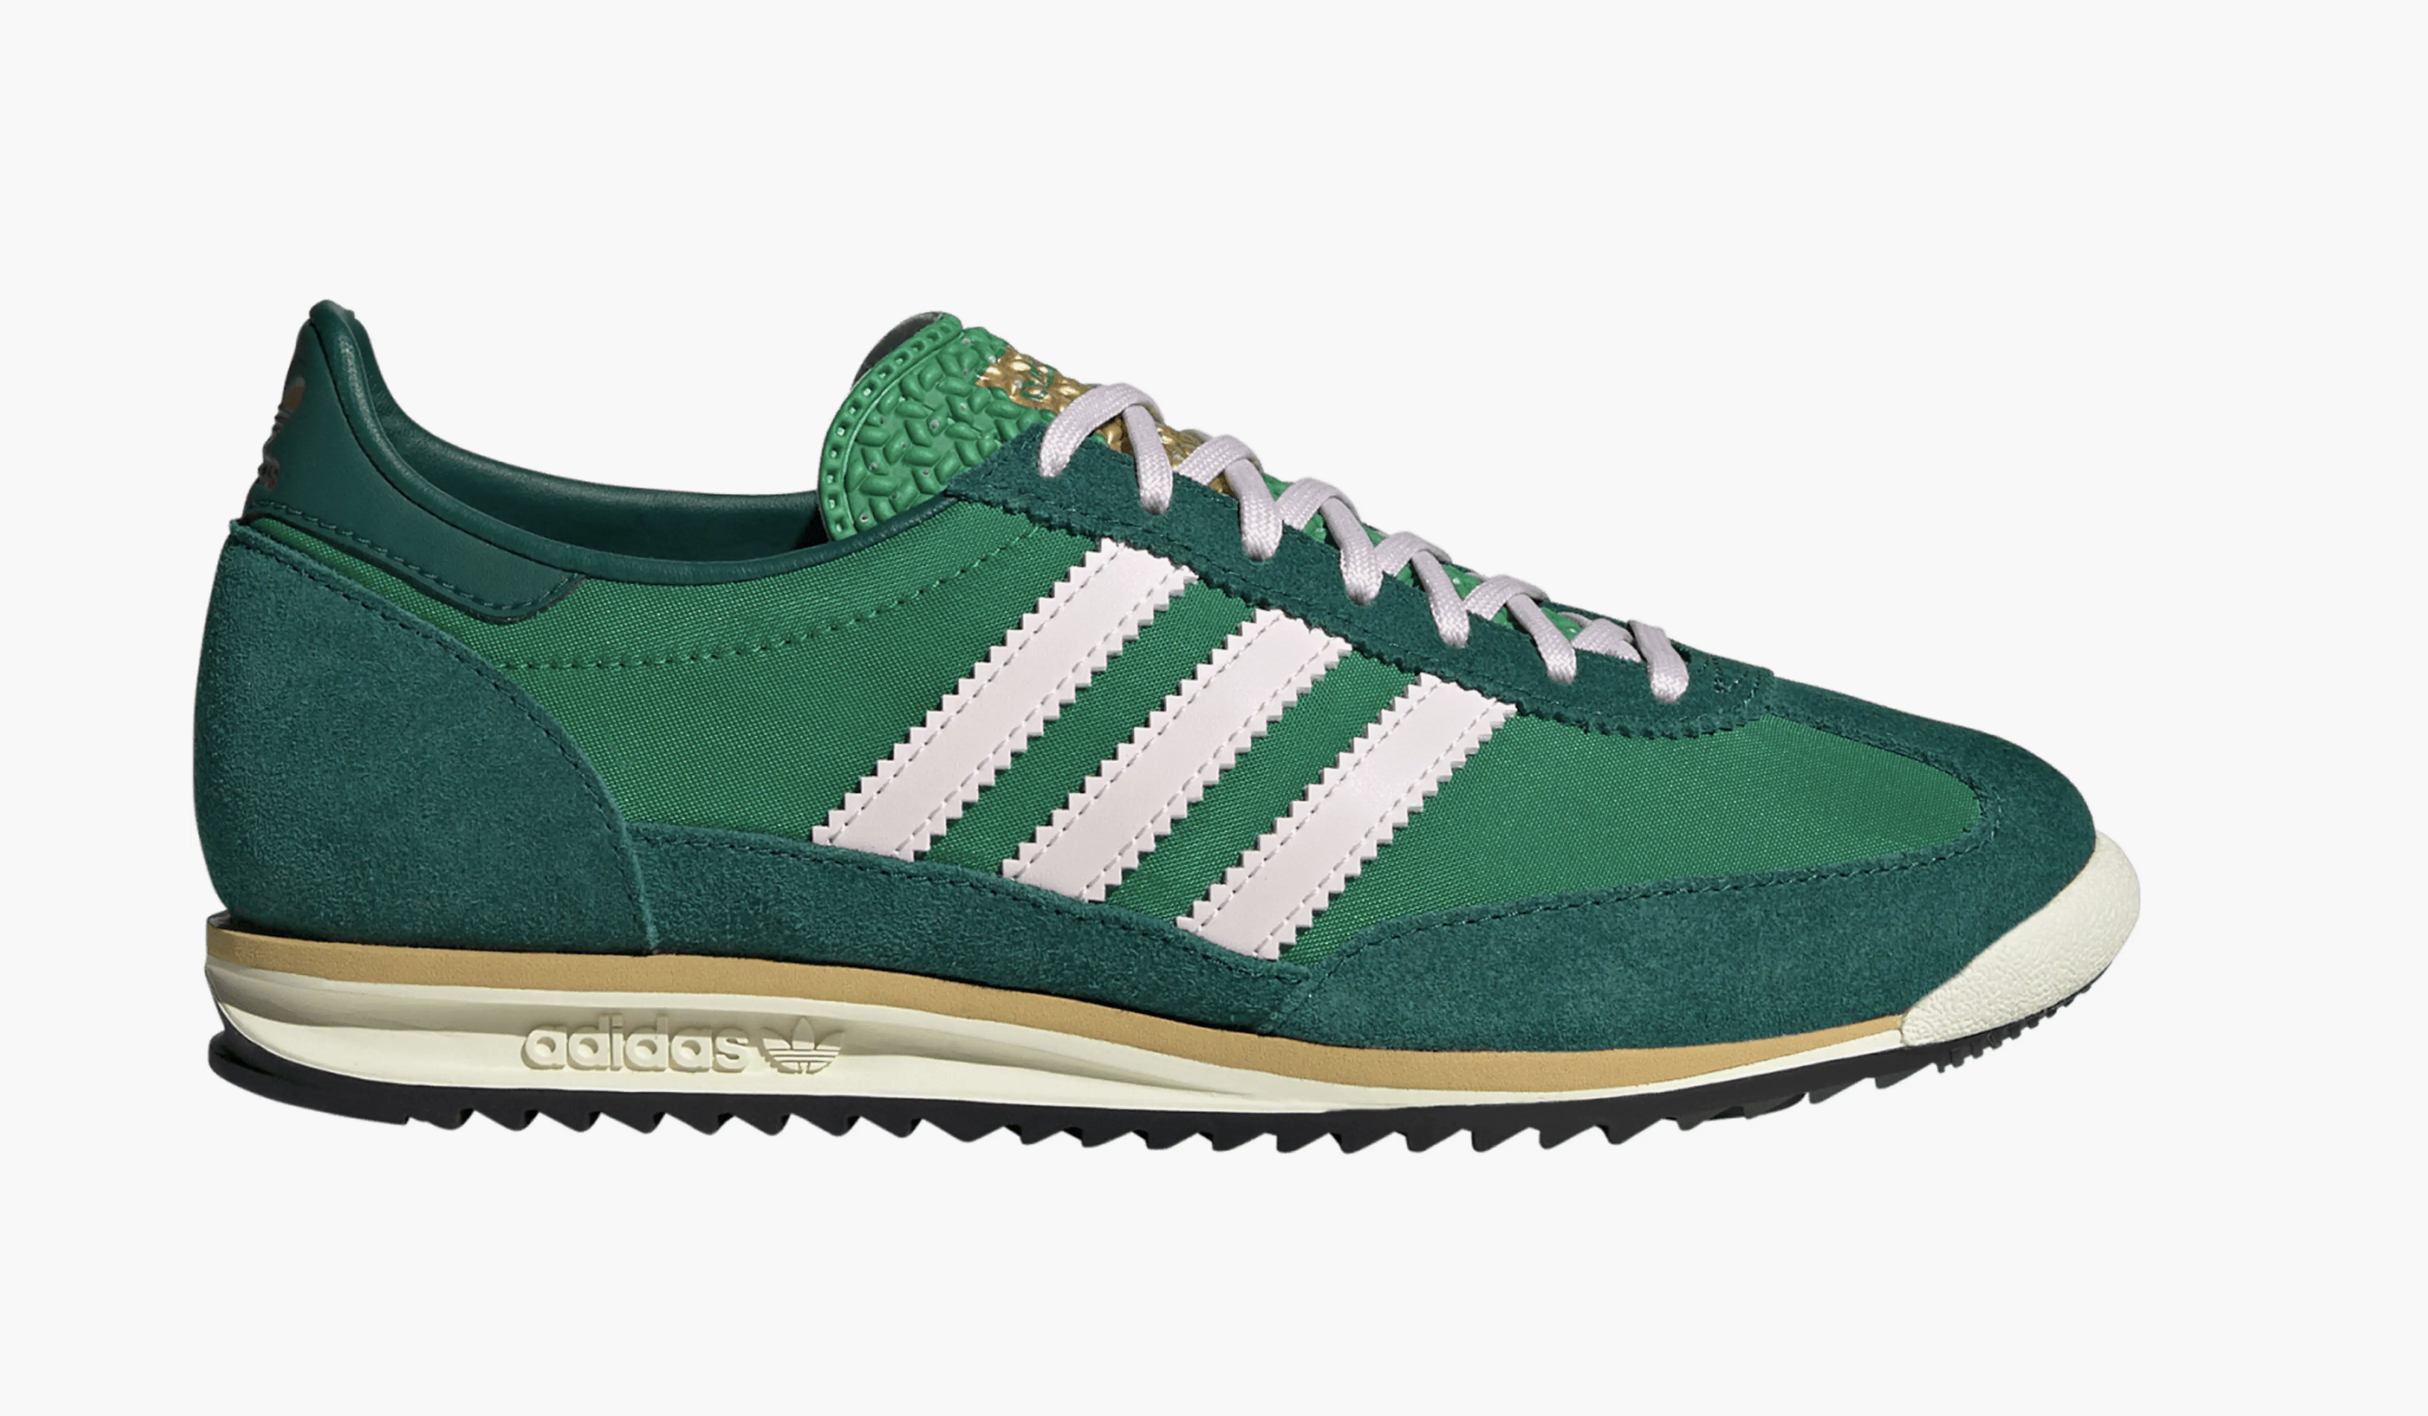 green and white adidas tennis shoe - nordstrom